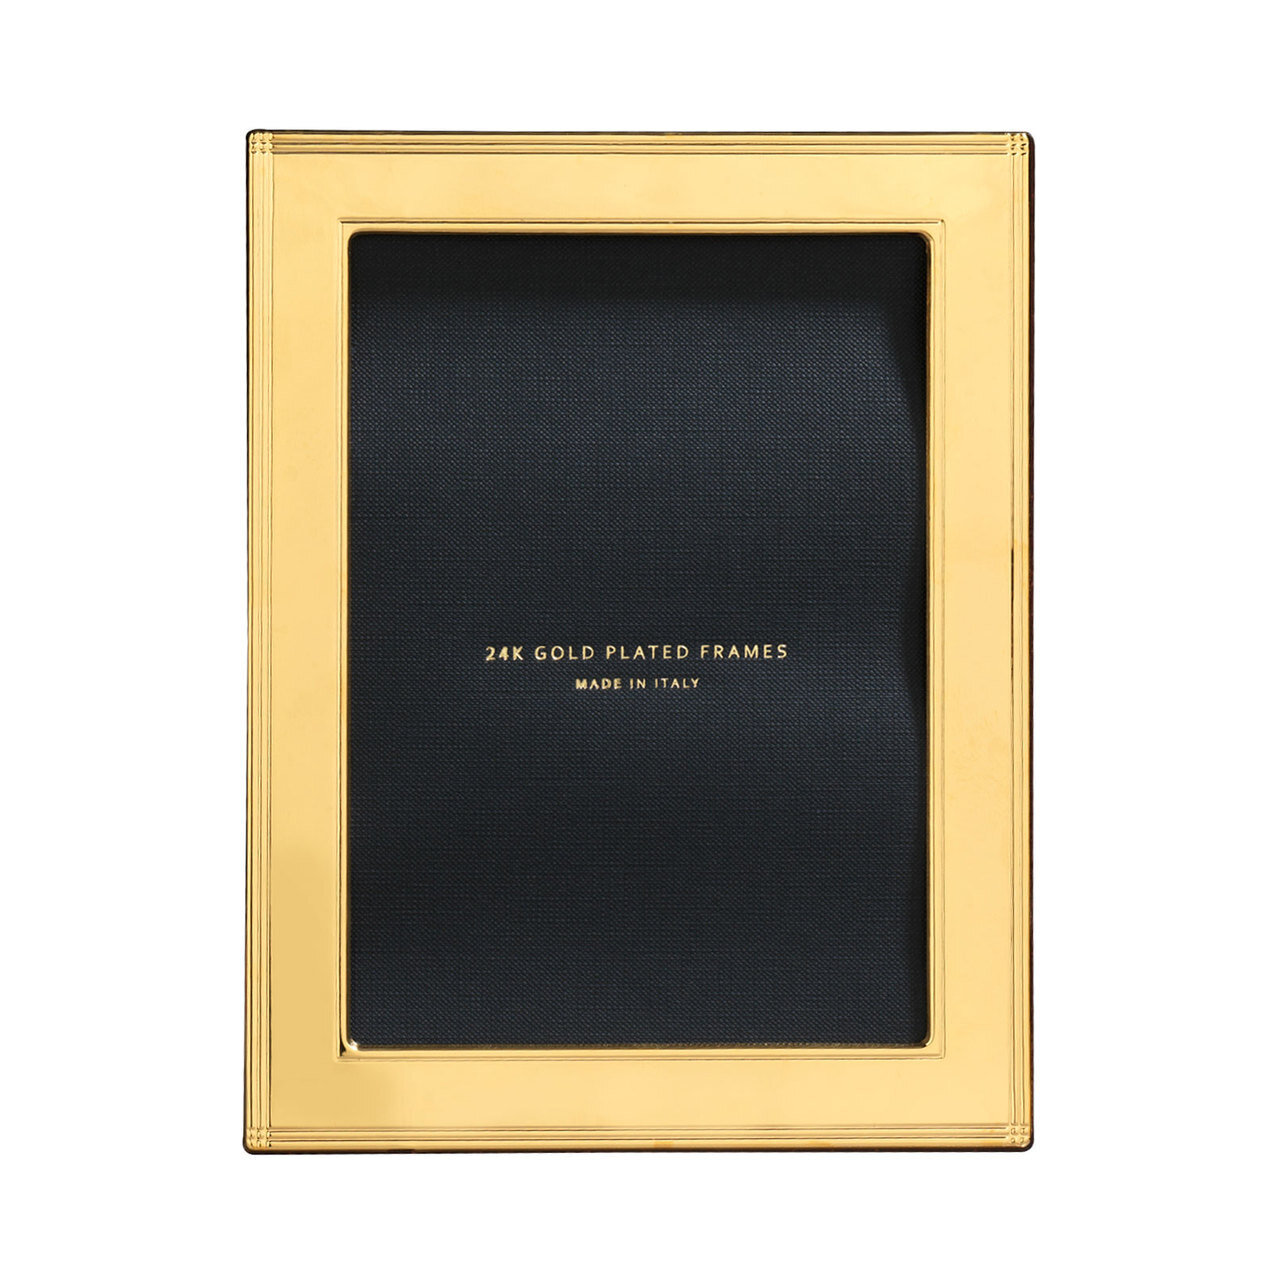 Cunill Madison 5 x 7 Inch Picture Frame - 24k Gold Plated 0.5 Microns